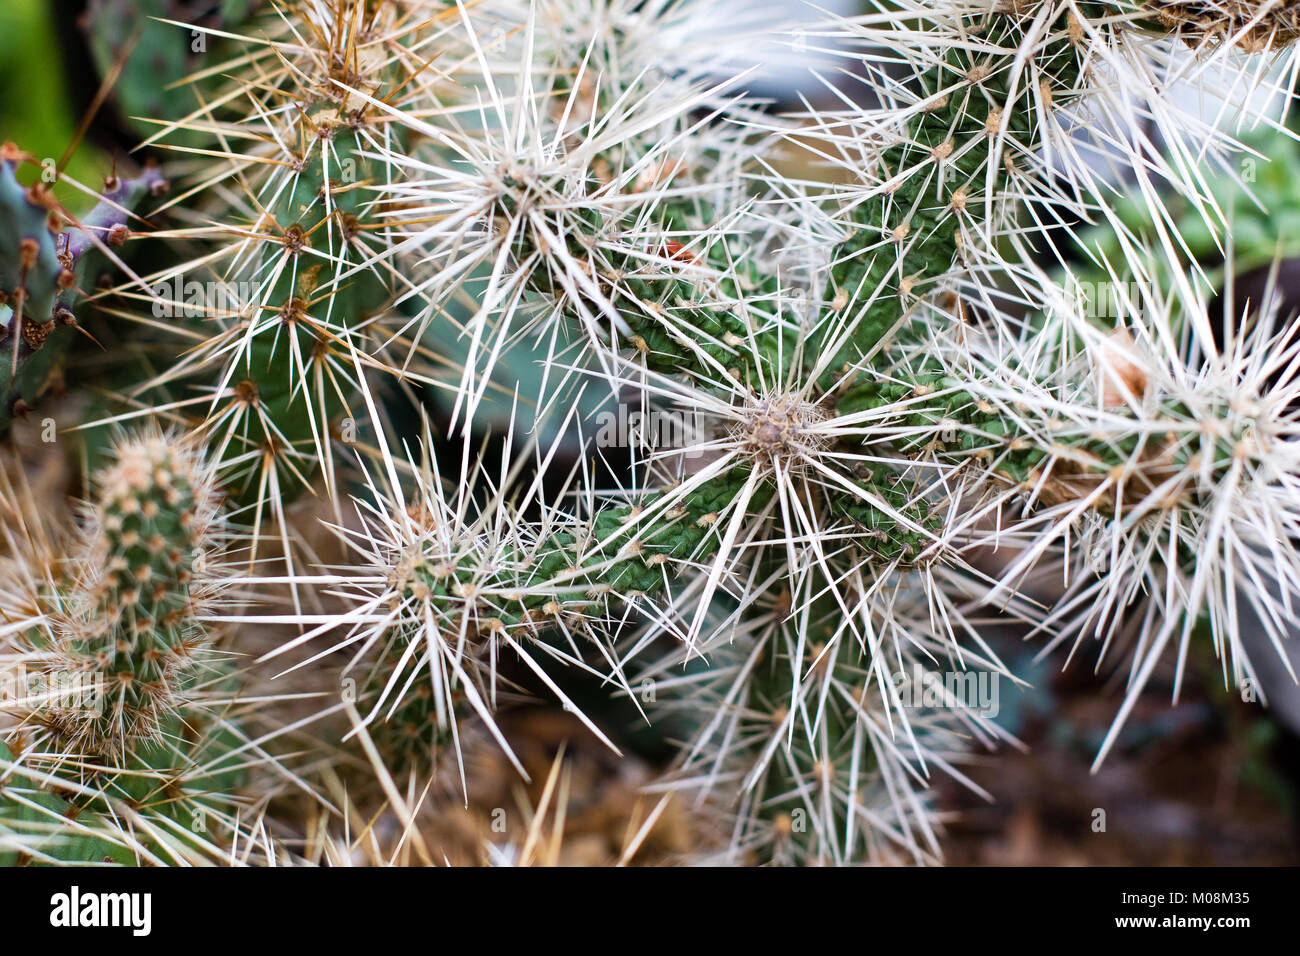 Close of a Cylindropuntia. Arrid cactus with long white spines and cracked green flesh. Stock Photo